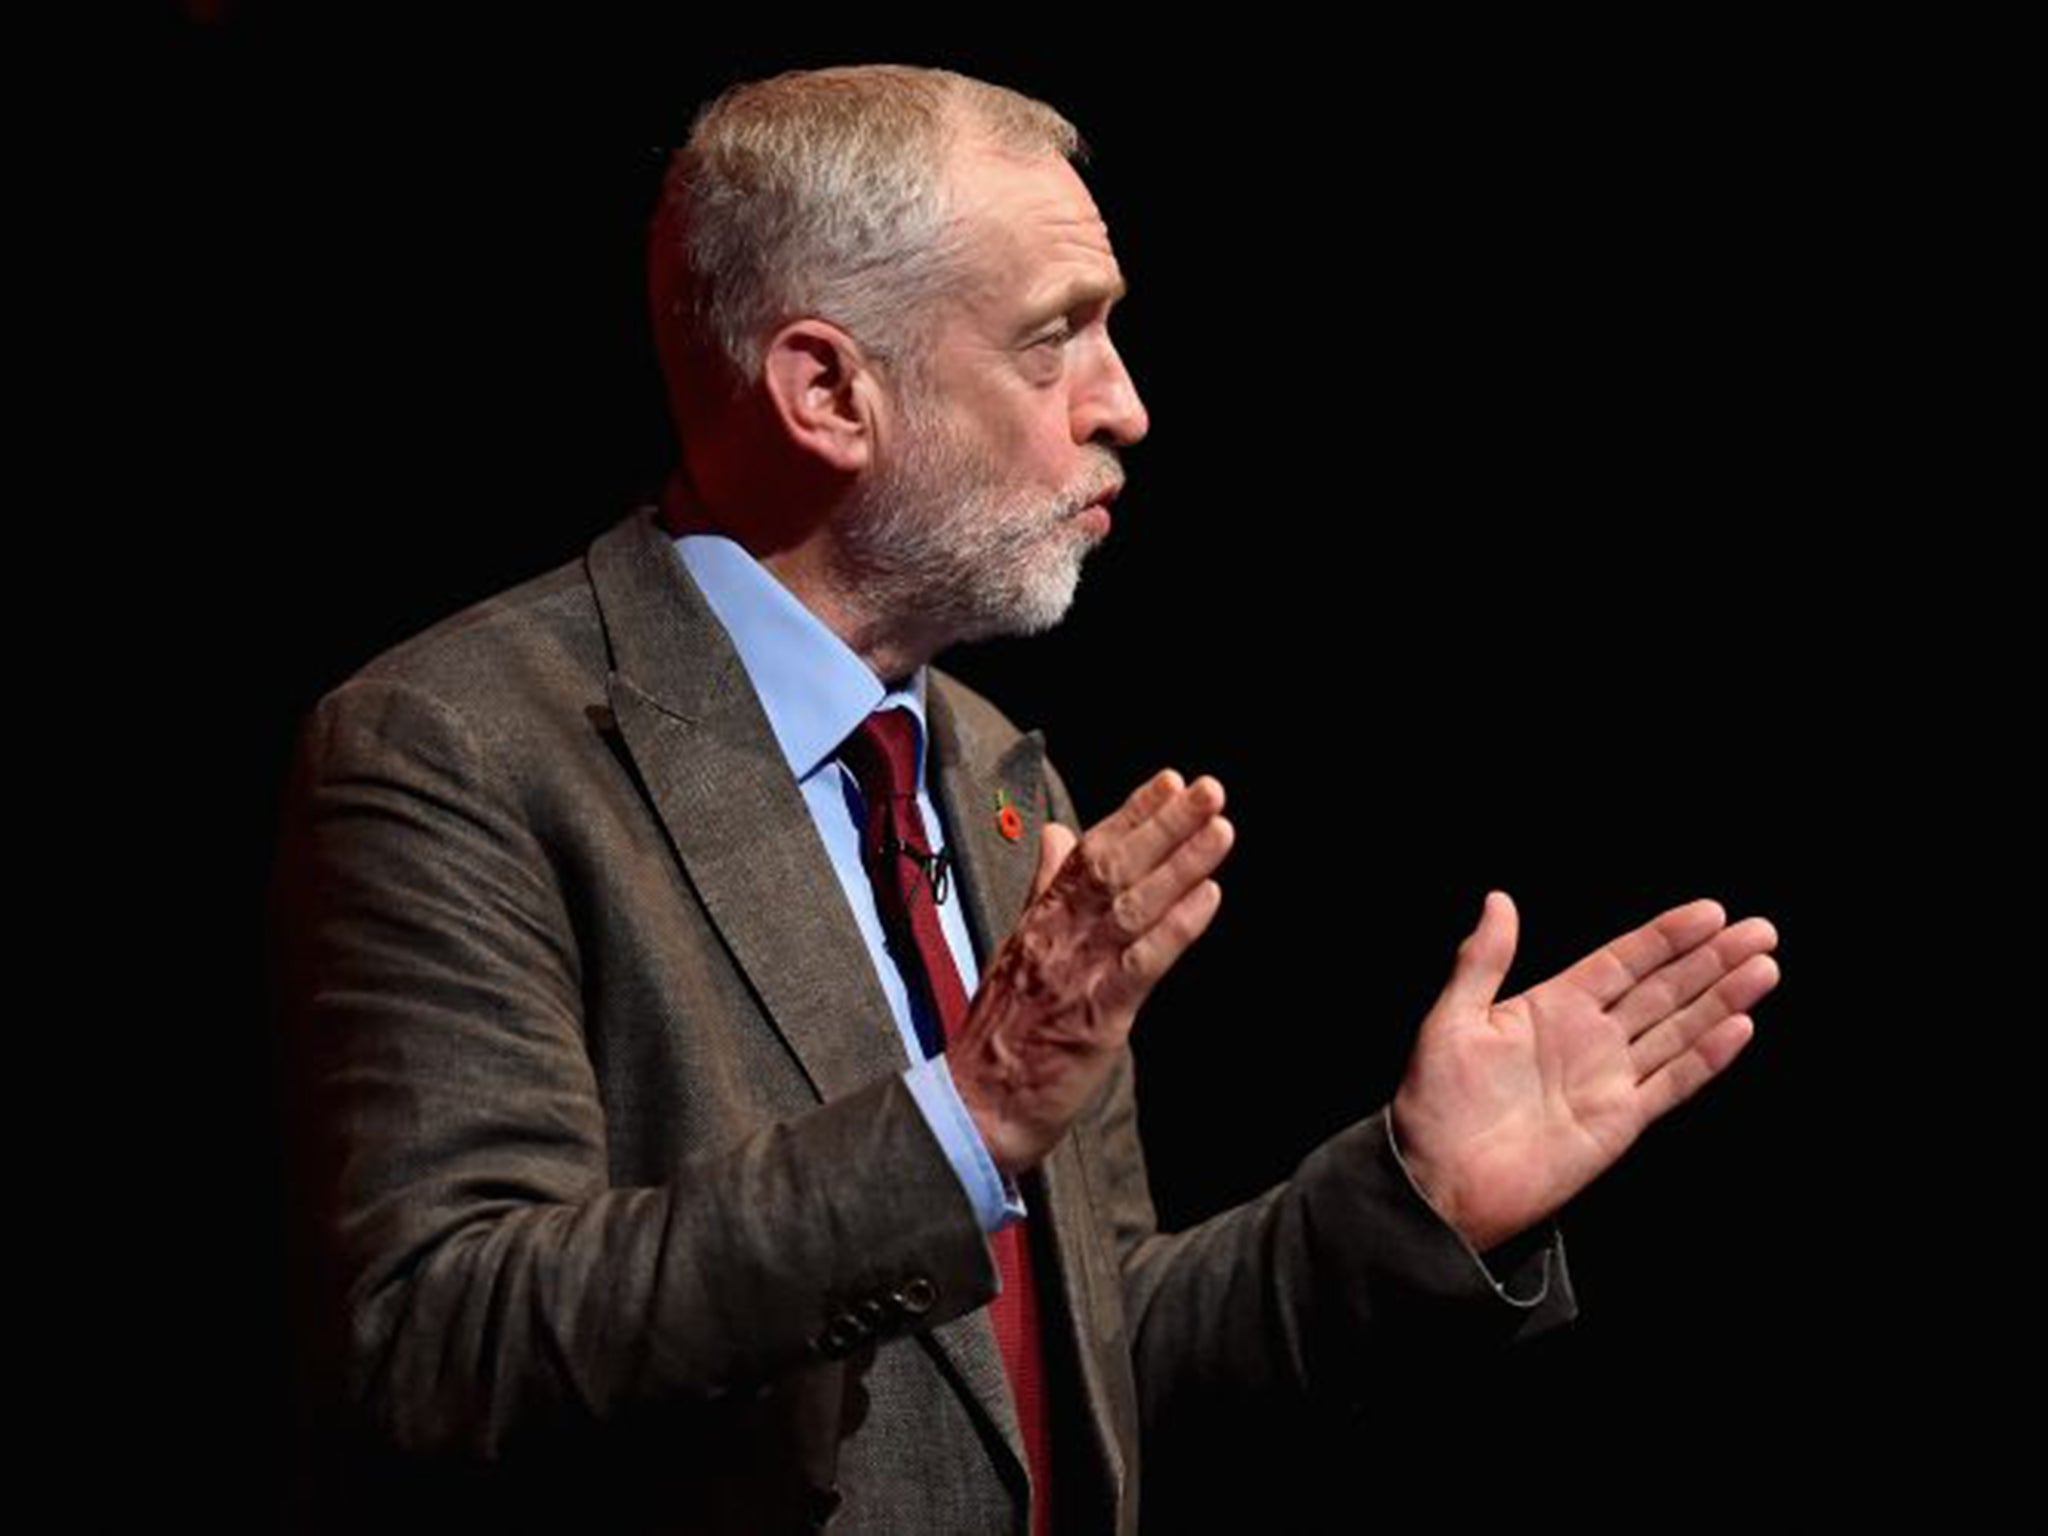 Jeremy Corbyn will play a crucial role in getting Labour members out to vote